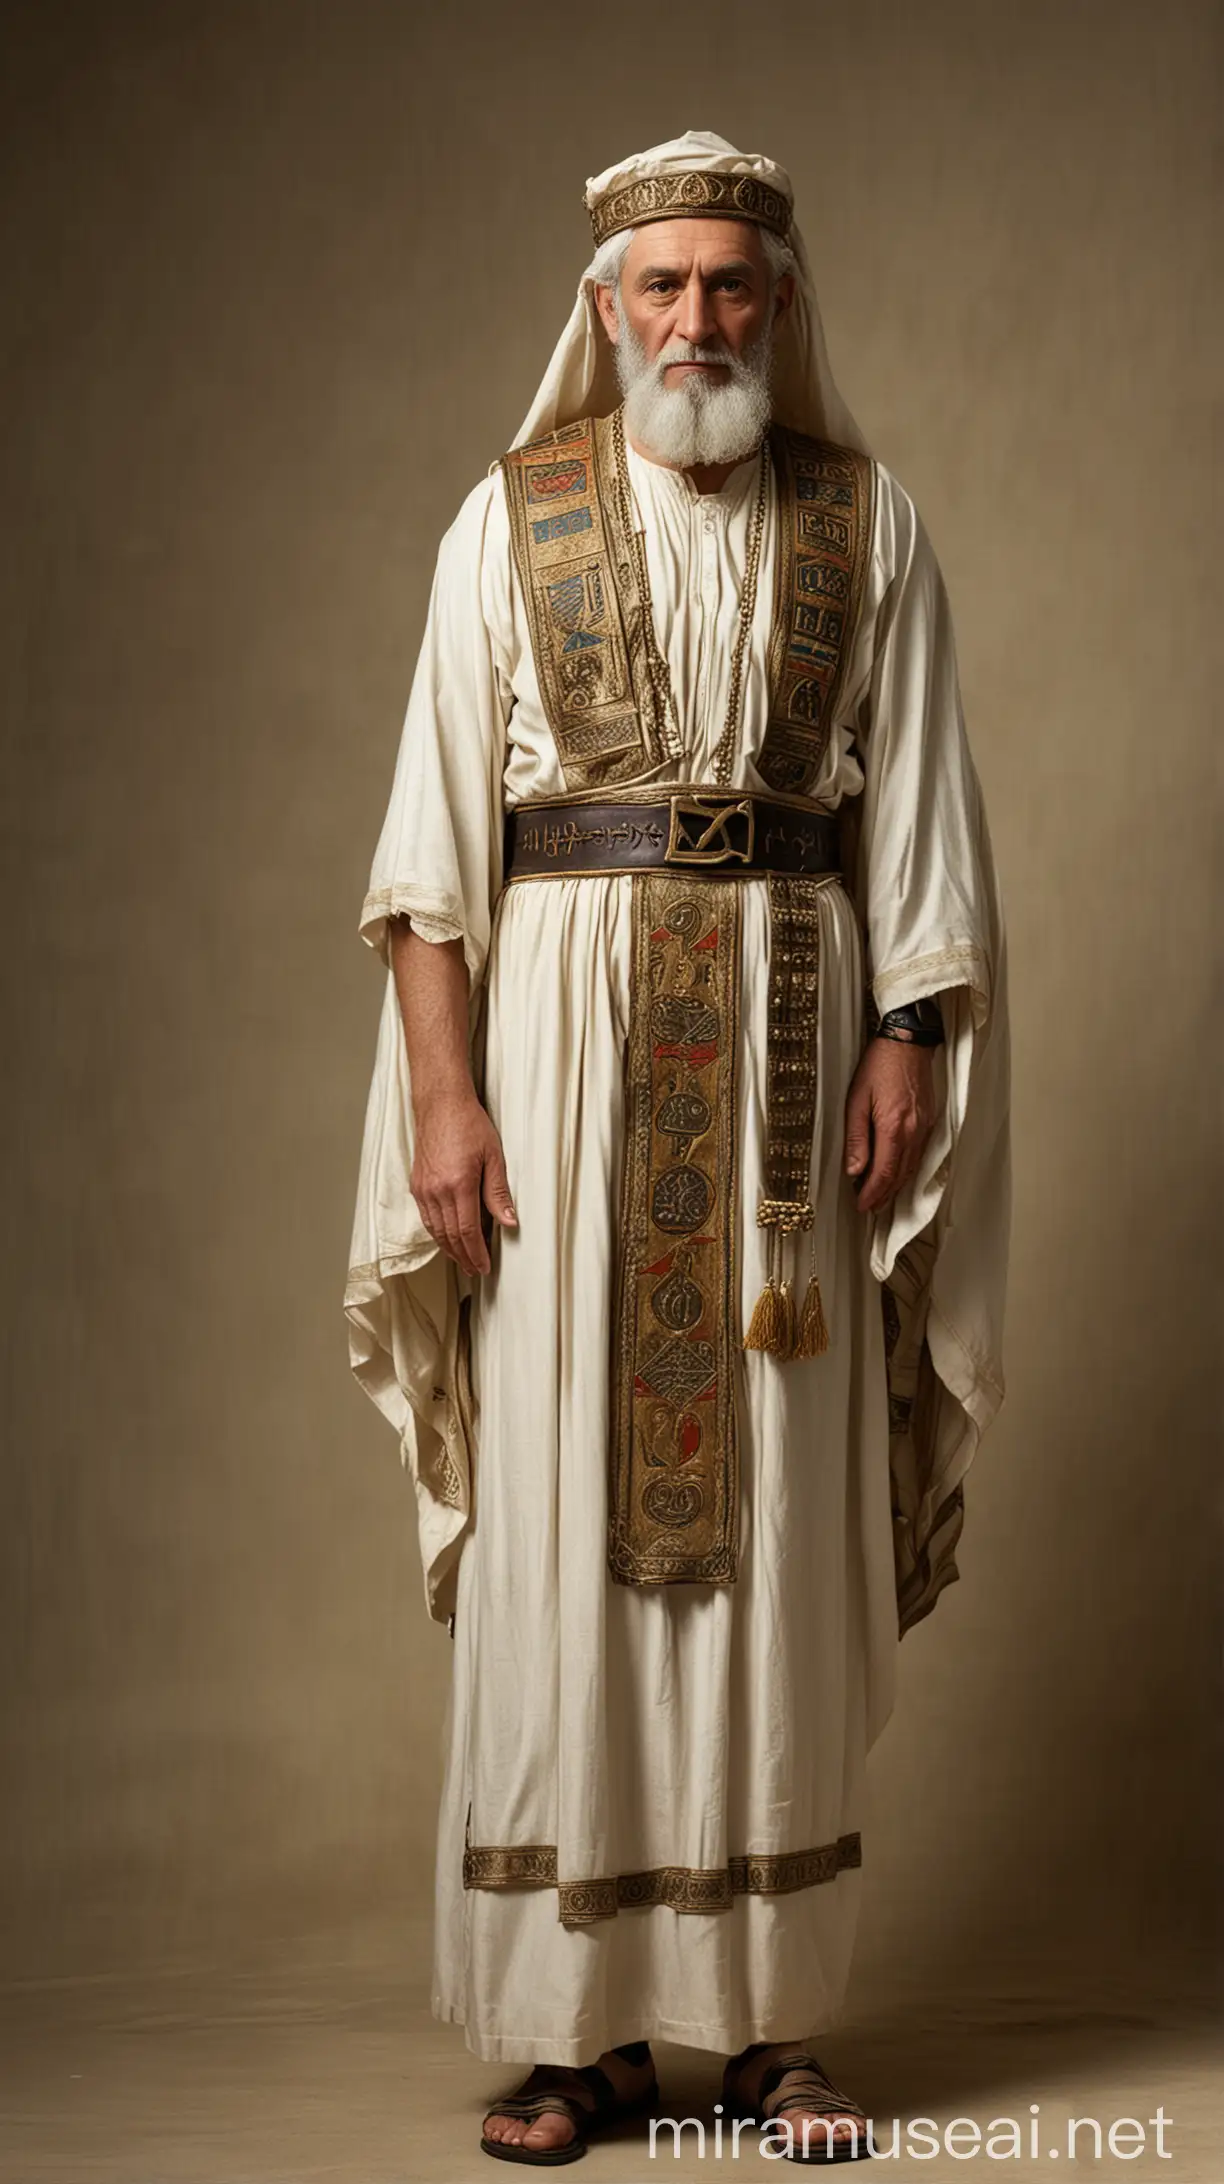 A 5th century BC priest named Azarael, dressed in traditional Hebrew garments, symbolizing the name 'God has helped' in Hebrew."In ancient world 